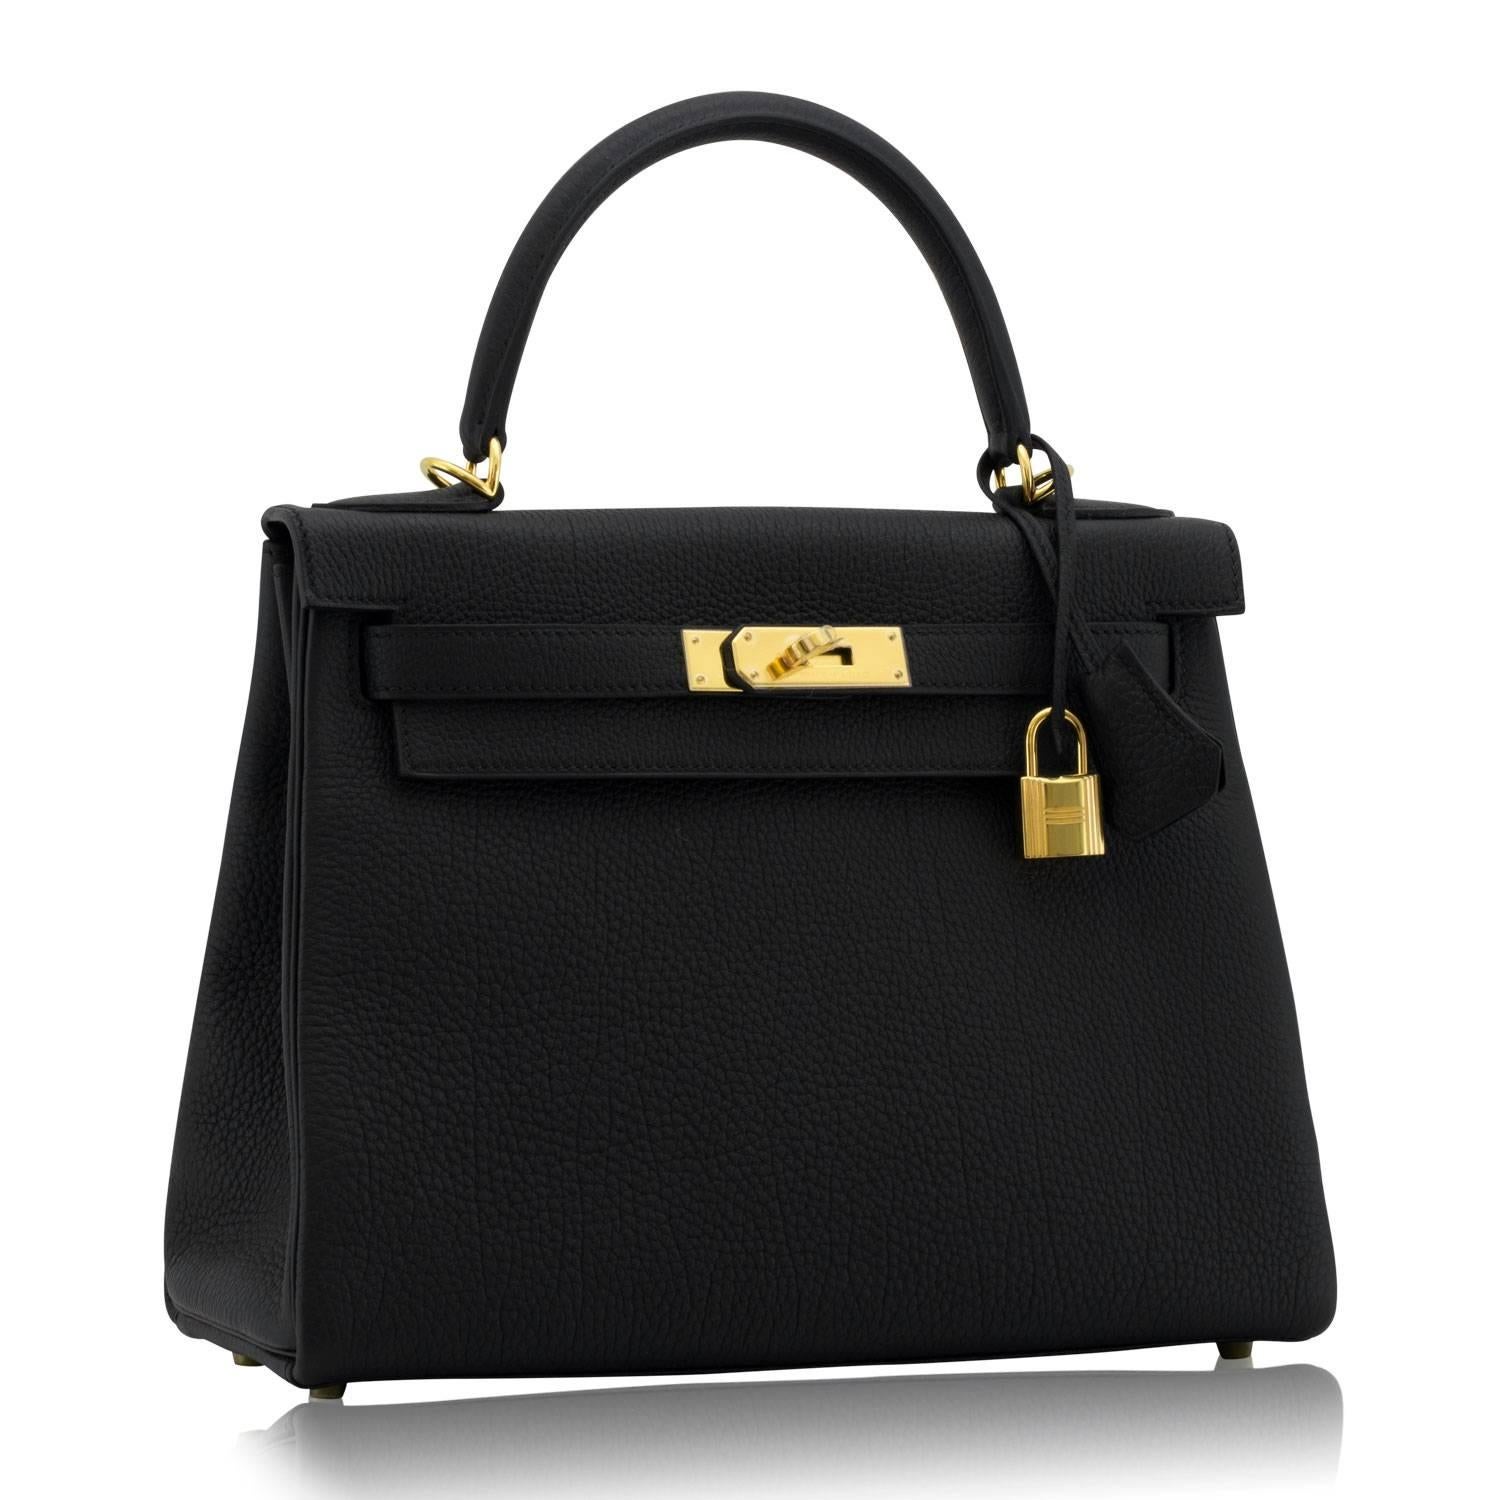 Hermes Kelly II 28 Retourne Togo Leather 89 Black Color Gold Hardware 2016

Pre-owned and never used.

Bought it in Hermes store in 2016.

Composition: Togo Leather.

Model: kELLY II

Size: 28cm width x 22cm height x 10cm depth

Color: